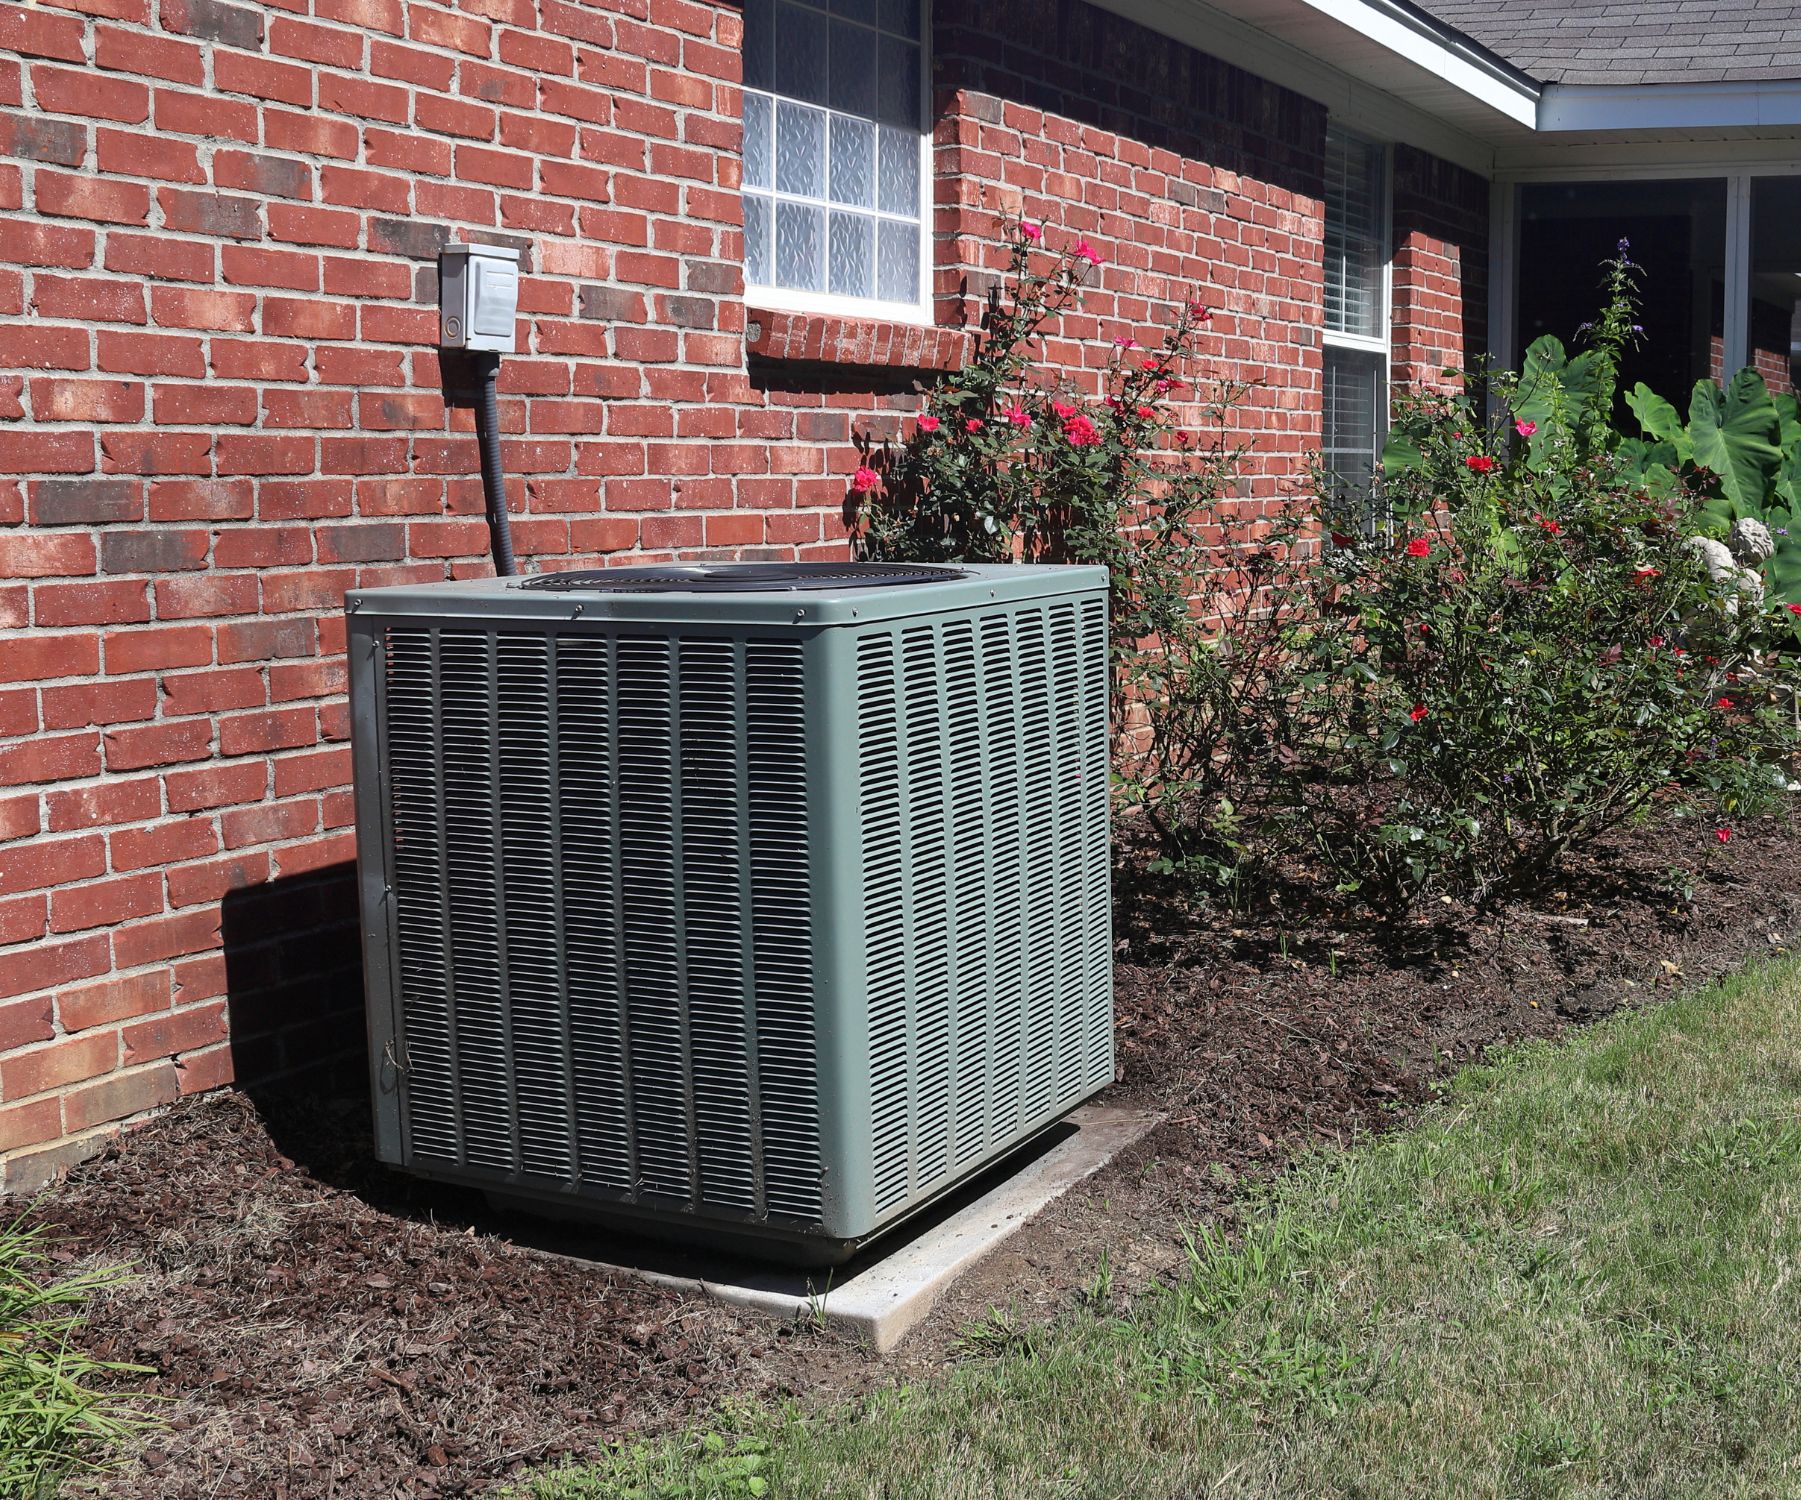 Mold in Air Conditioning Units